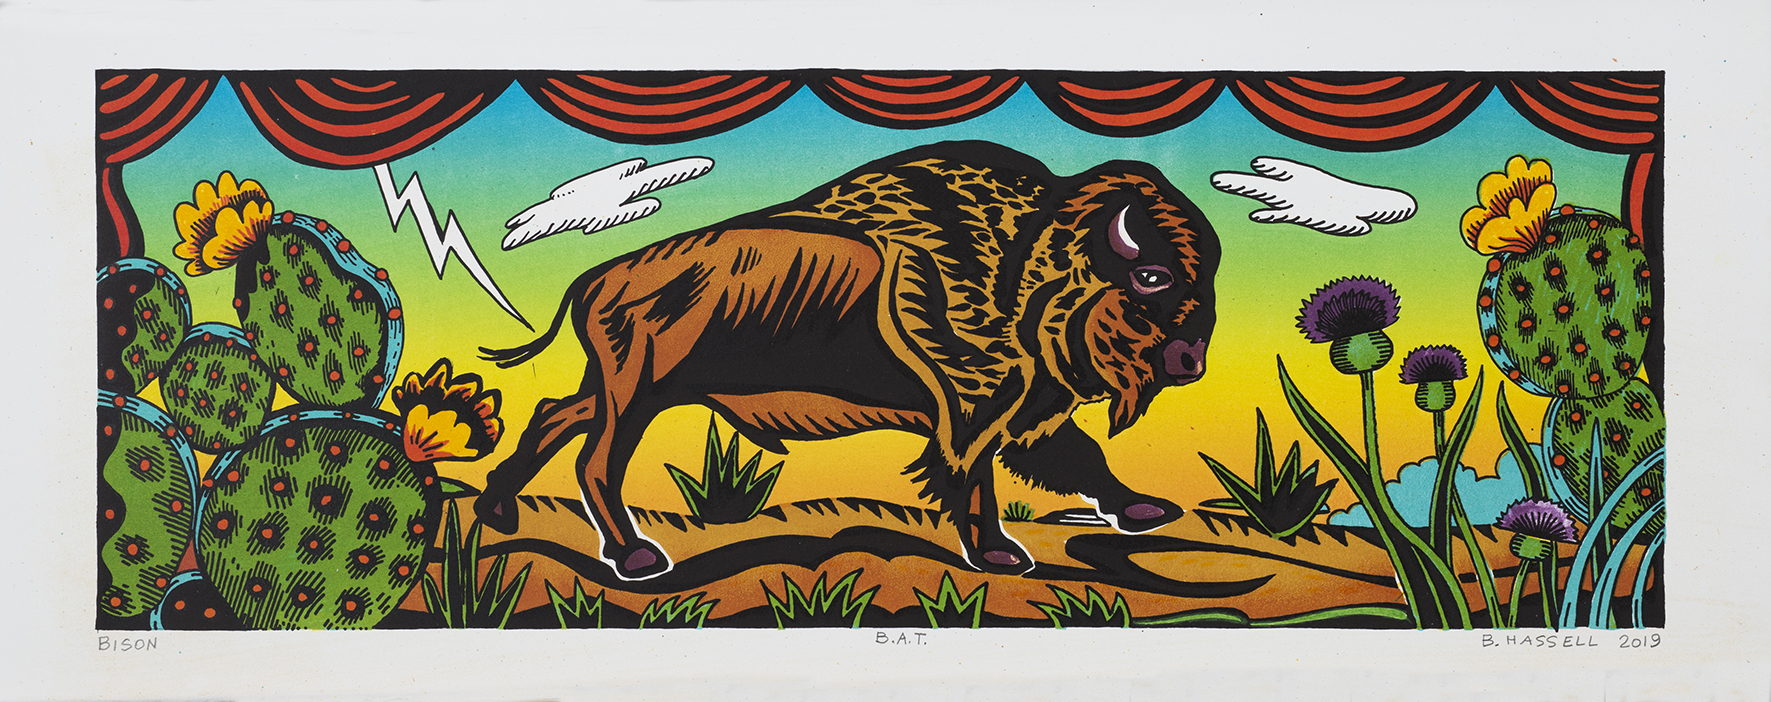 Billy Hassell BISON color lithograph  8.5” x 24”